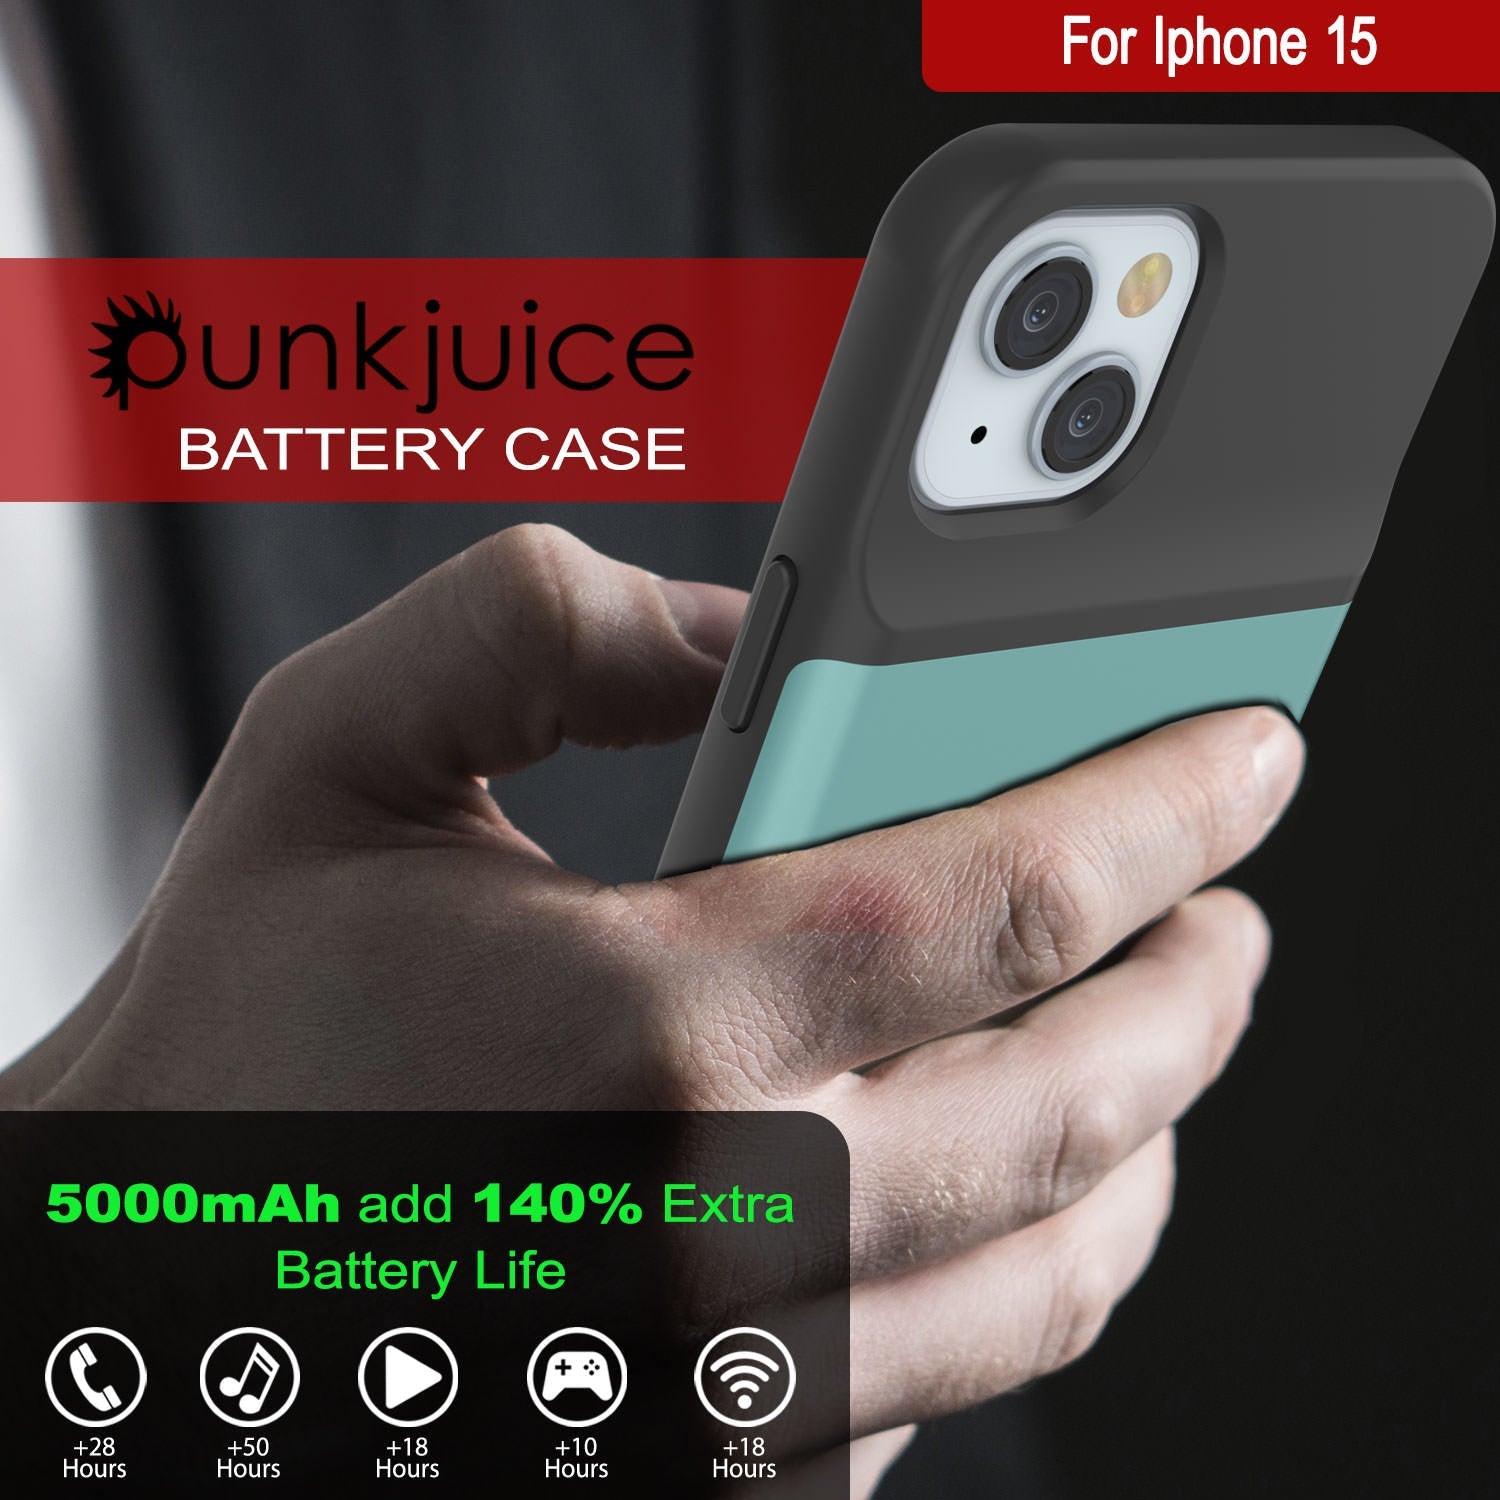 iPhone 15 Battery Case, PunkJuice 5000mAH Fast Charging Power Bank W/ Screen Protector | [Teal]